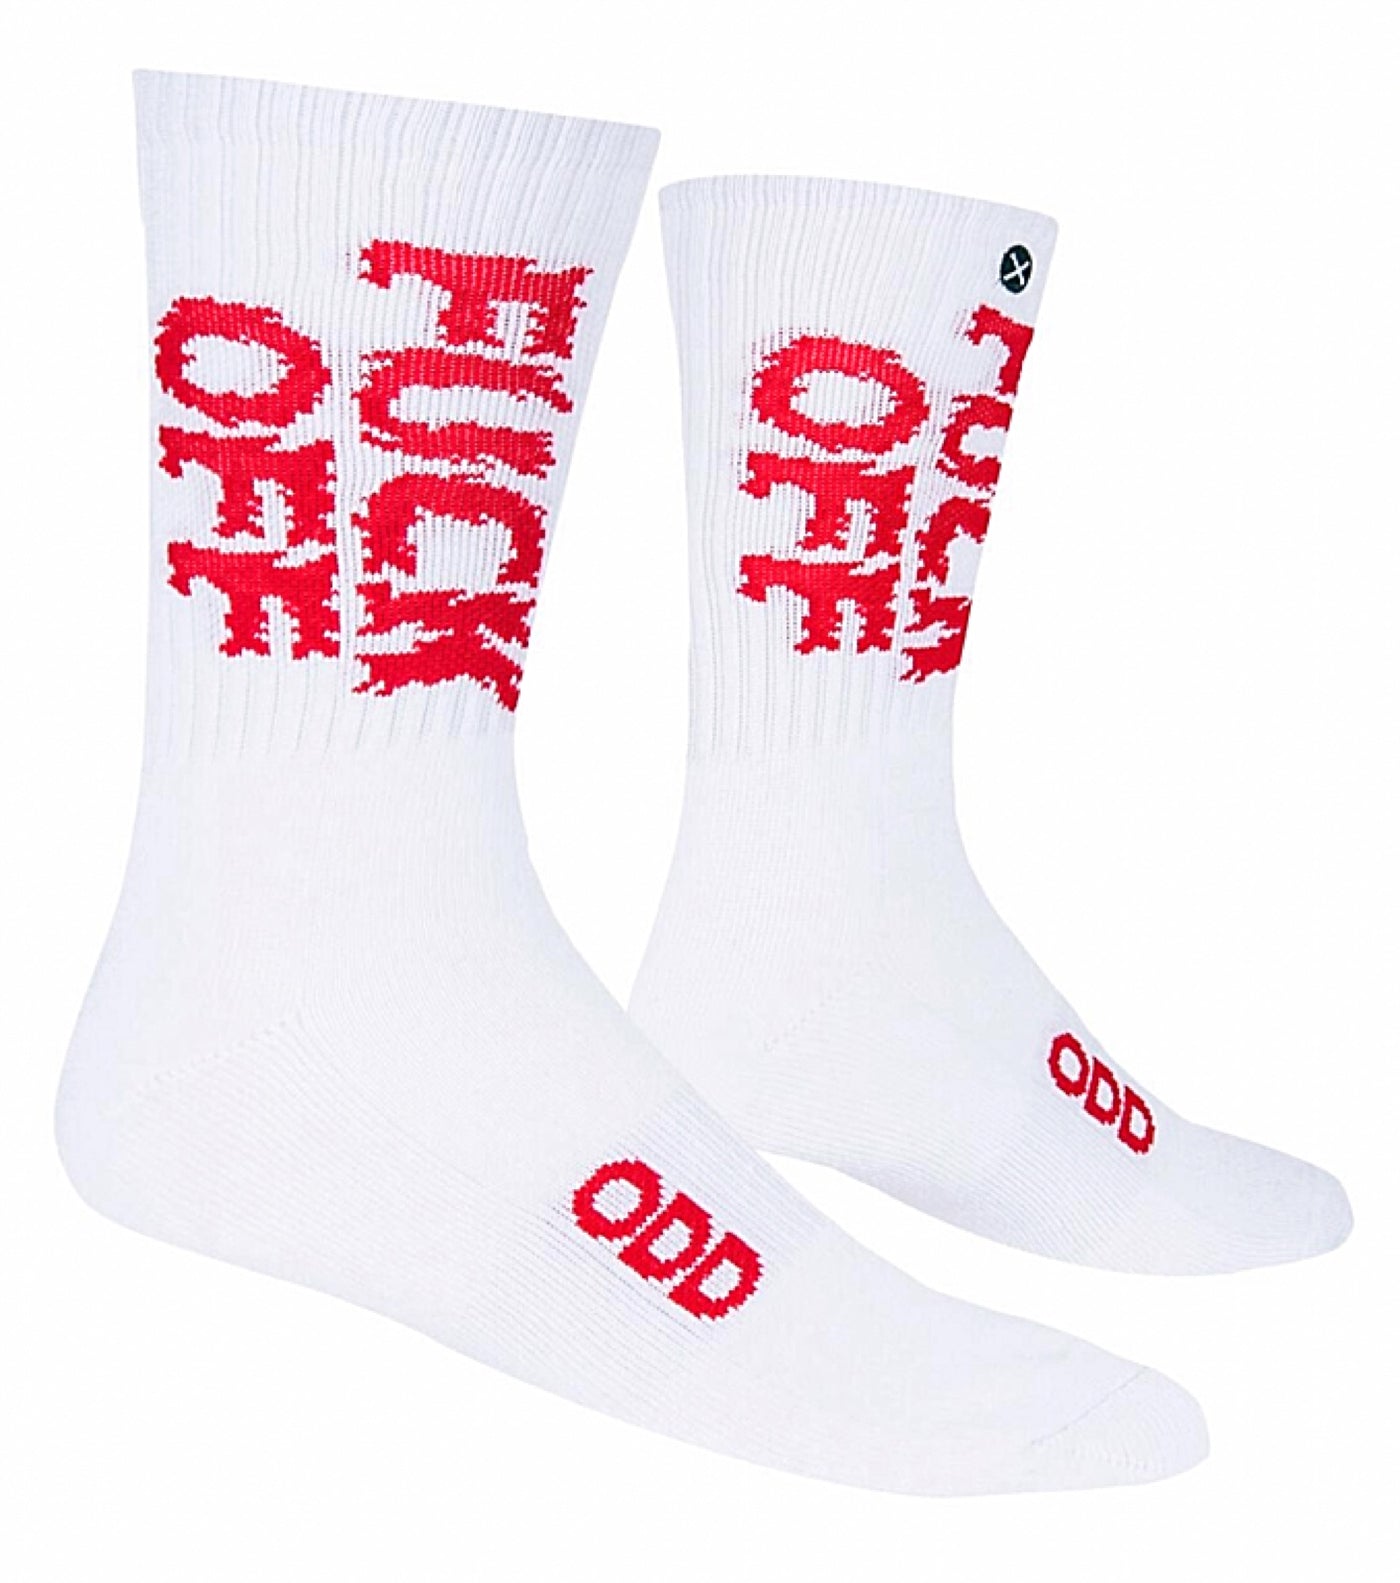 Jaws Cotton Crew Socks by ODD Sox – Great Sox